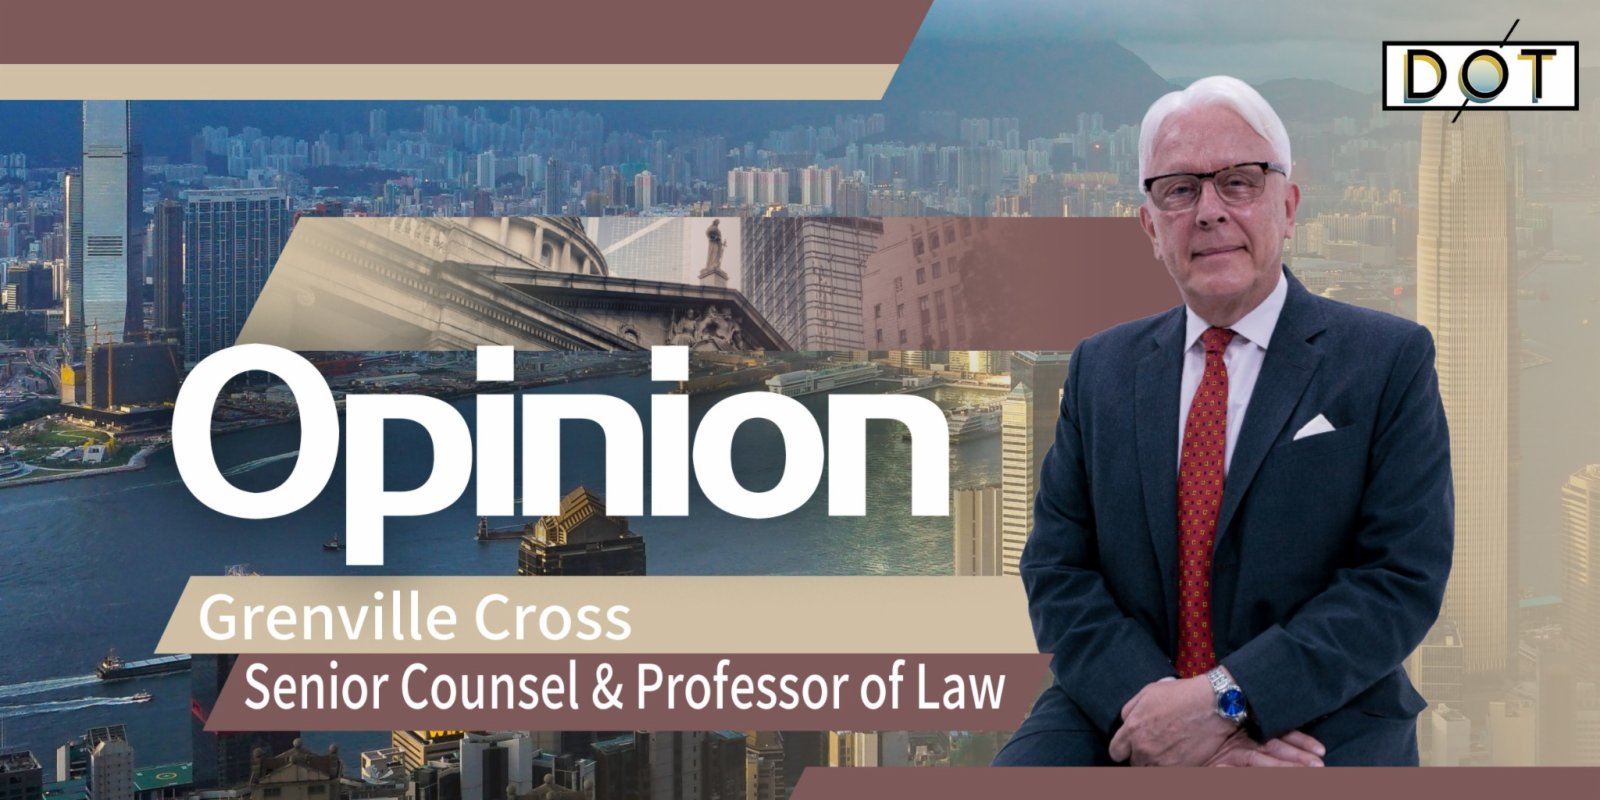 Full Text | Opening remarks by Grenville Cross at 'HKSAR 25th Anniversary: Business & Rule of Law'